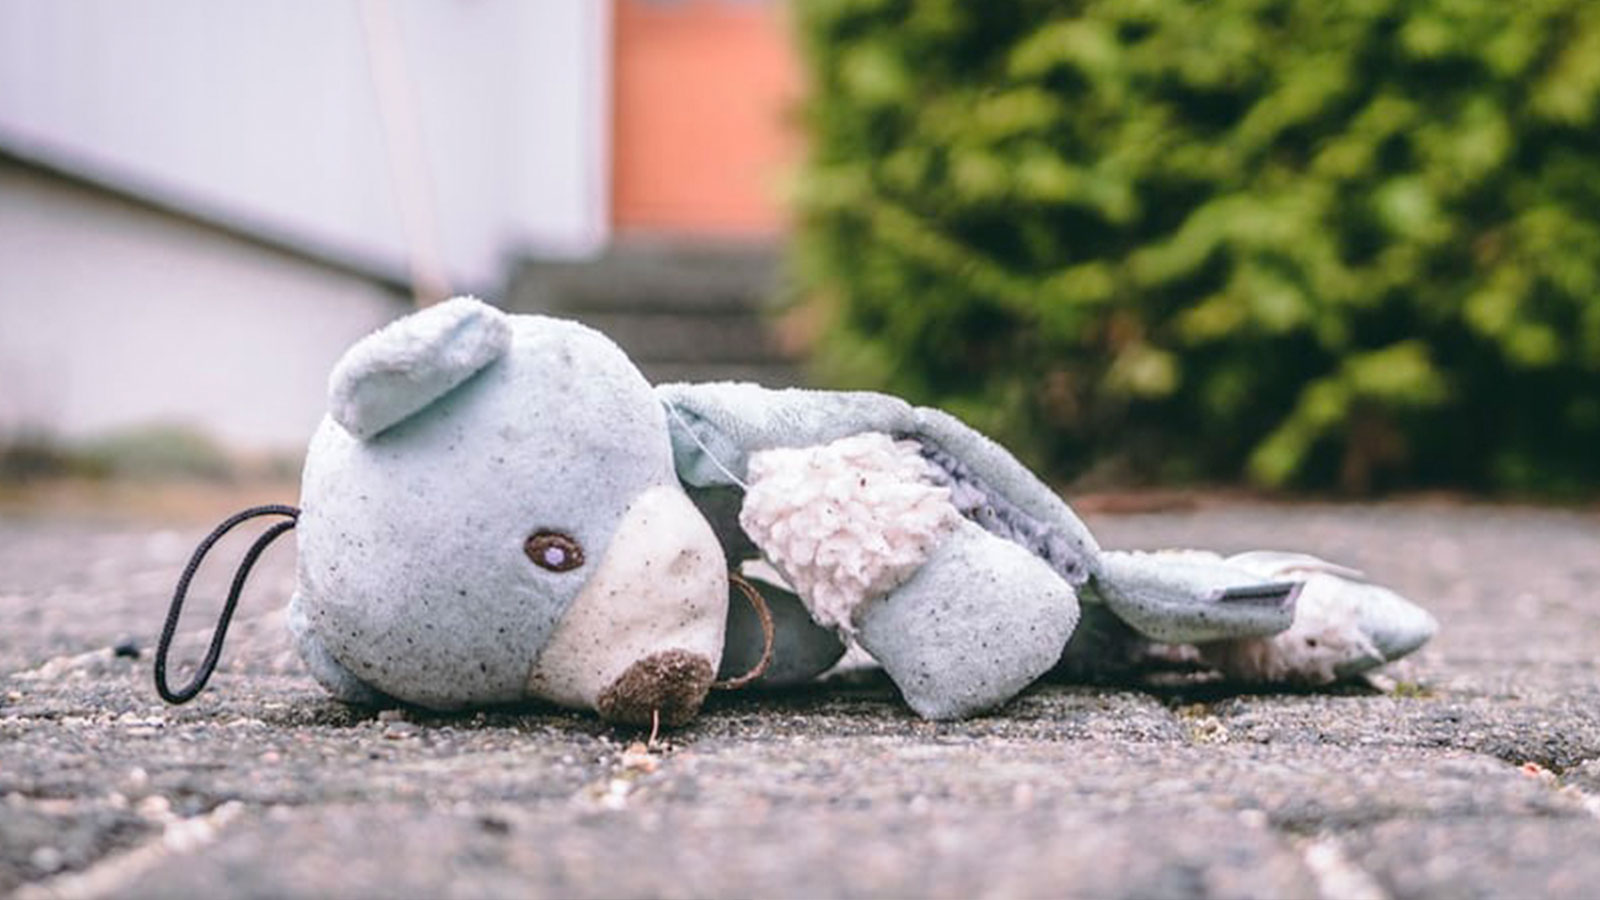 MINDinMIND Thought Piece on bullying feature image of a teddy lying on path outside a building